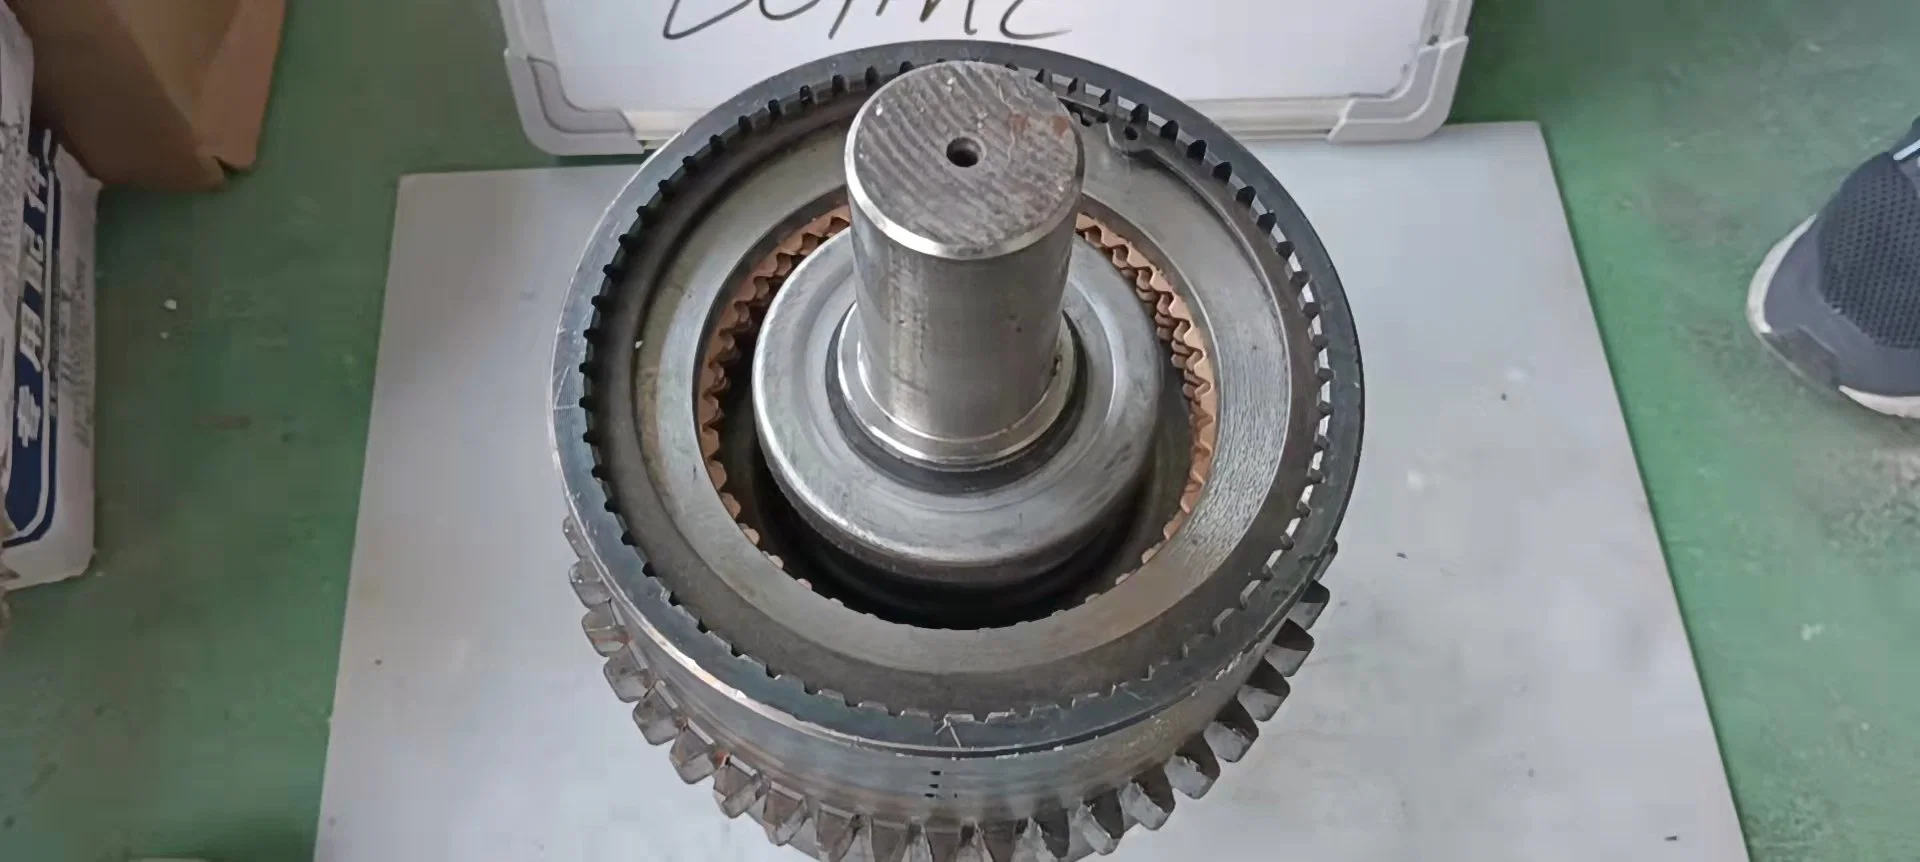 Mini Small Loader 280 Clutch Assembly (with no teeth) at Low Speed 45 Tooth46 Tooth Transmission Parts